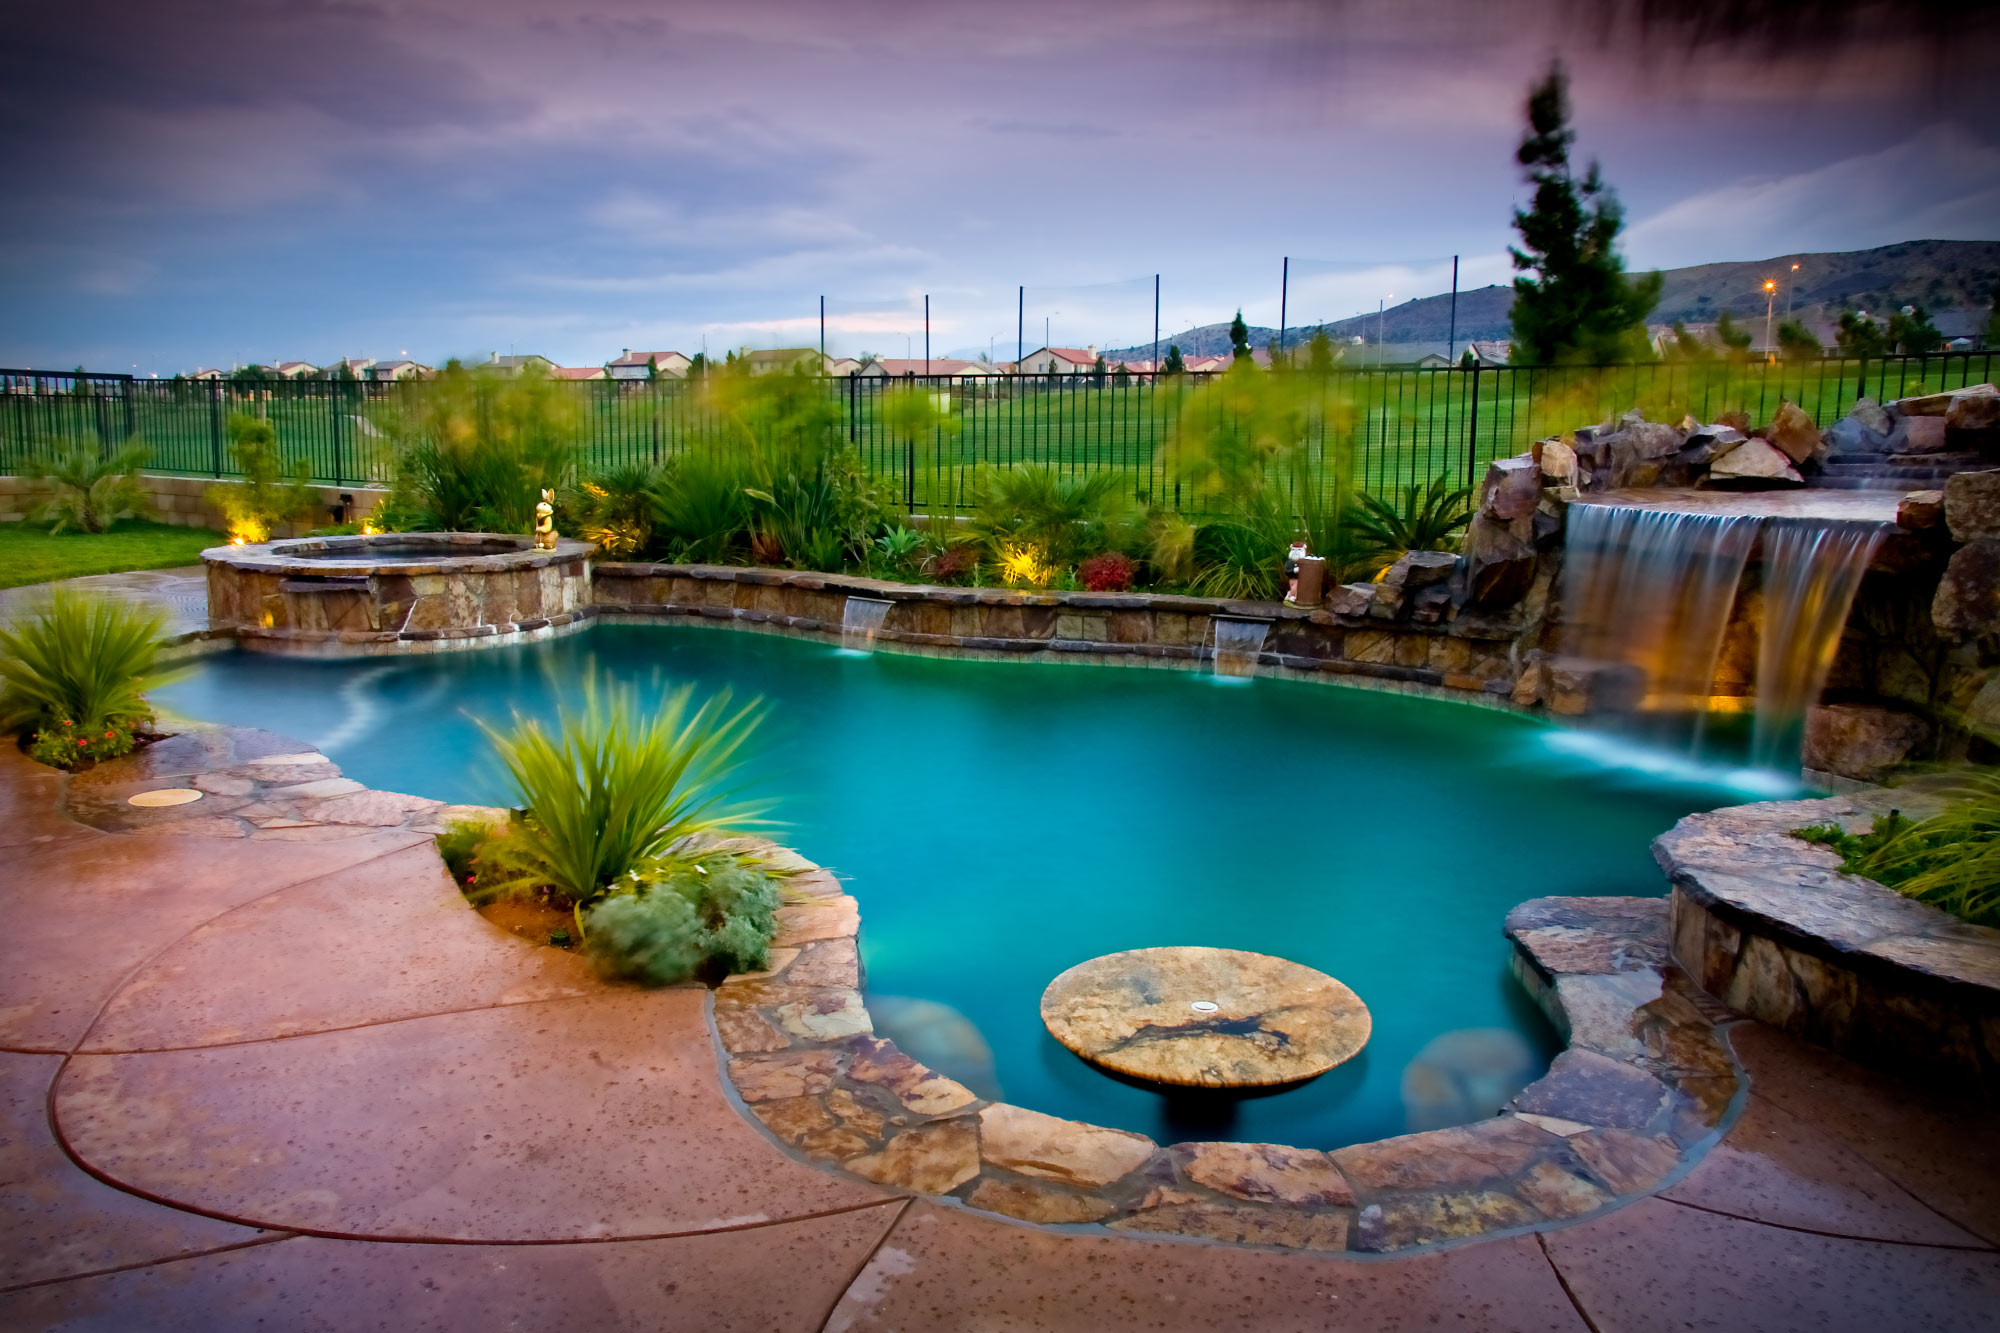 FAQs You Should Ask Before Installing a Pool